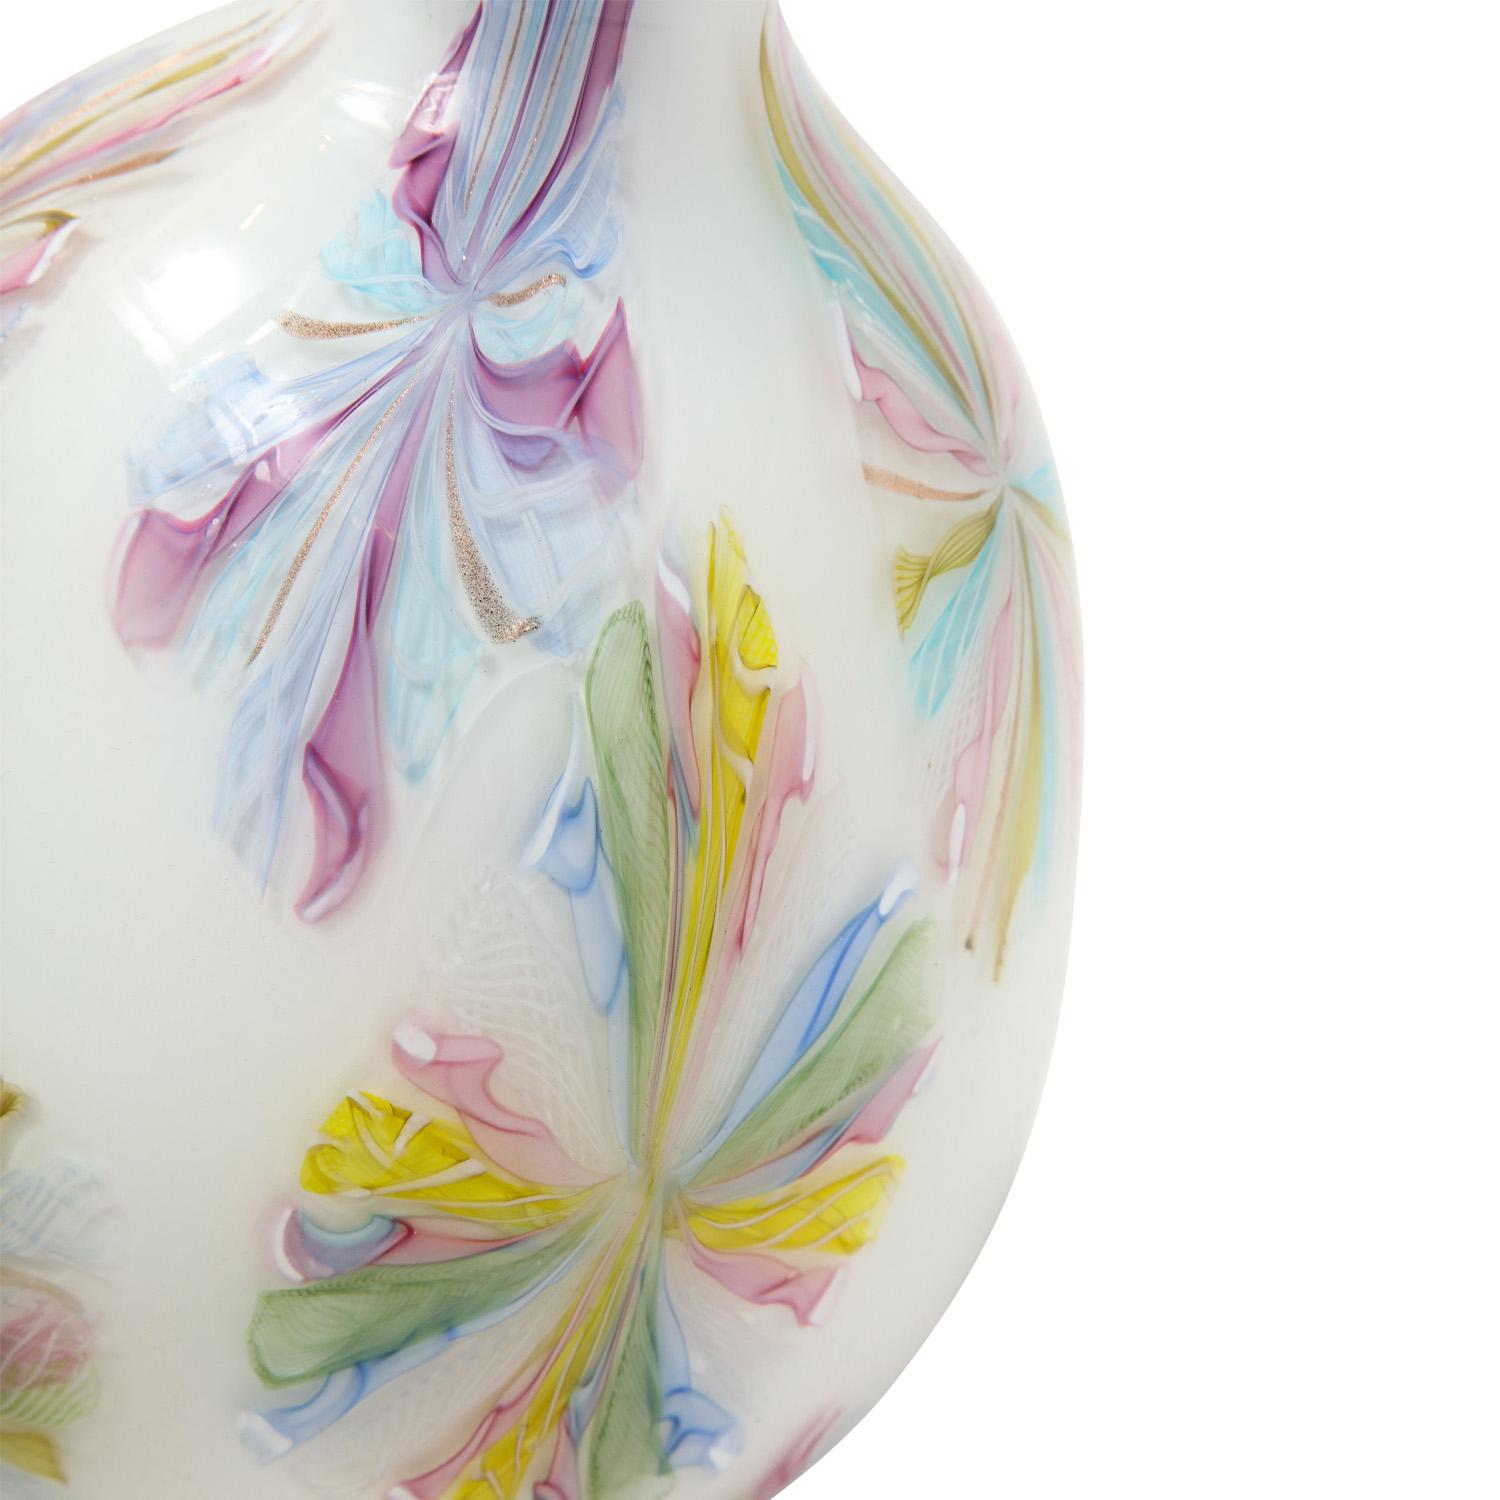 Italian A.V.E.M Hand Blown Glass Vase with Colorful Starburst Murrhines, 1950s For Sale